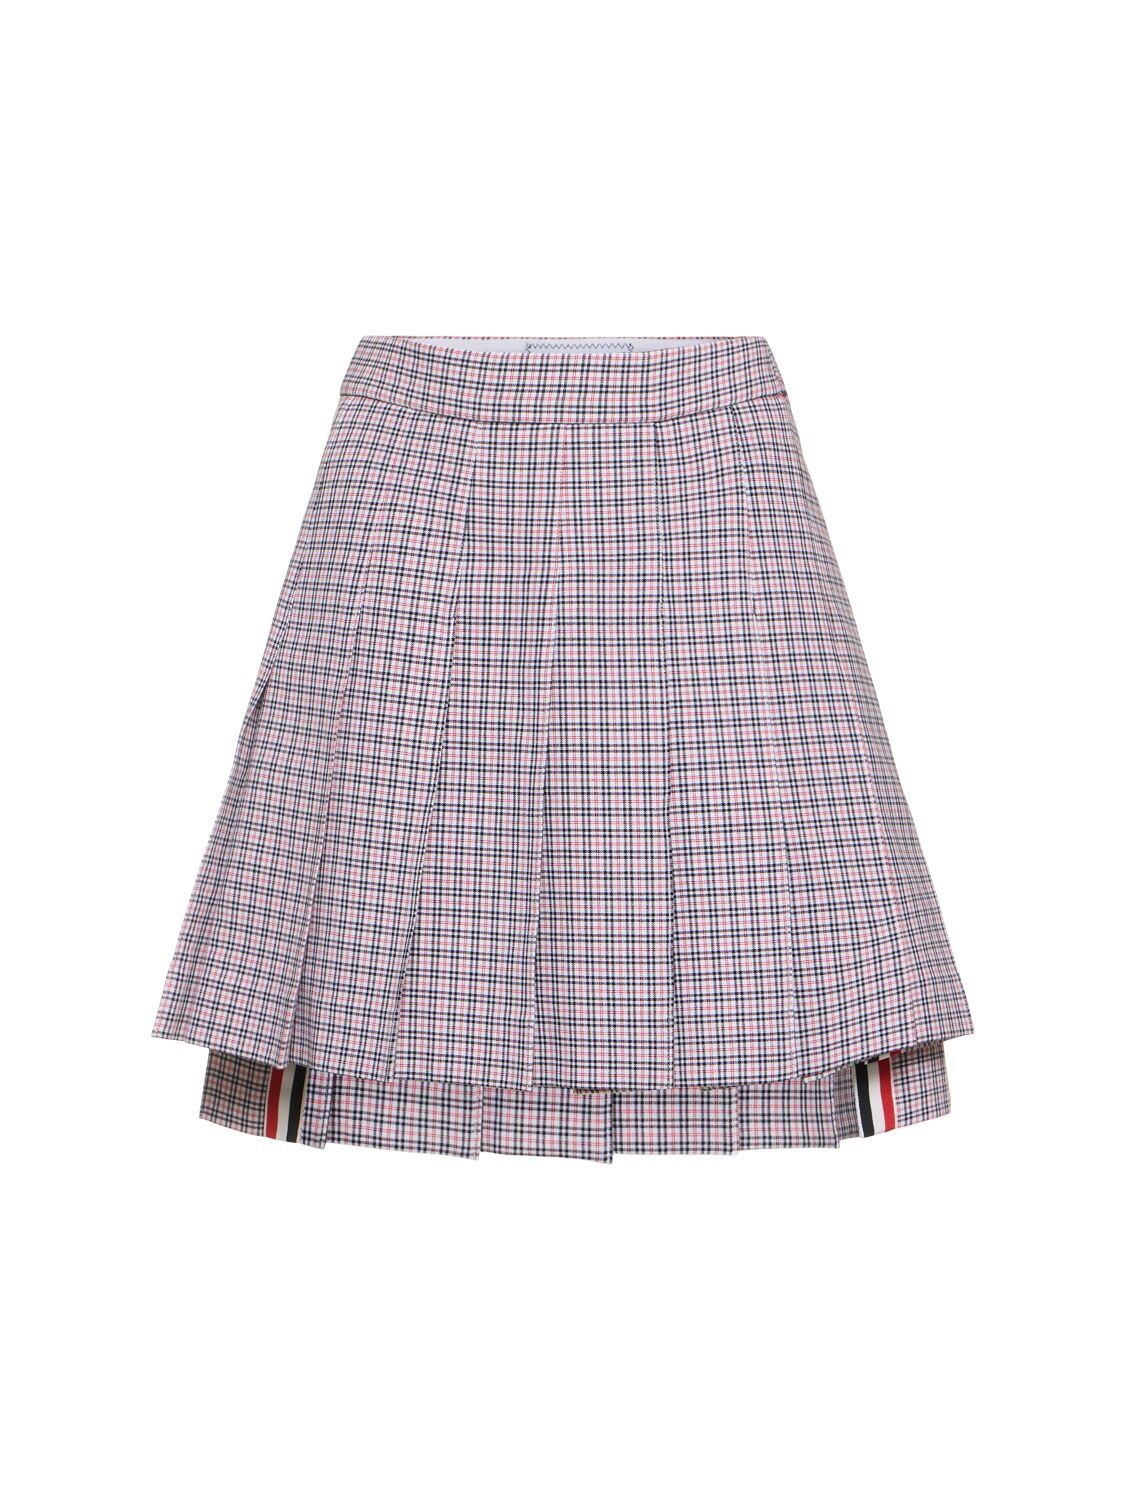 Thom Browne Check Printed Crepe Pleated Mini Skirt In Multicolor